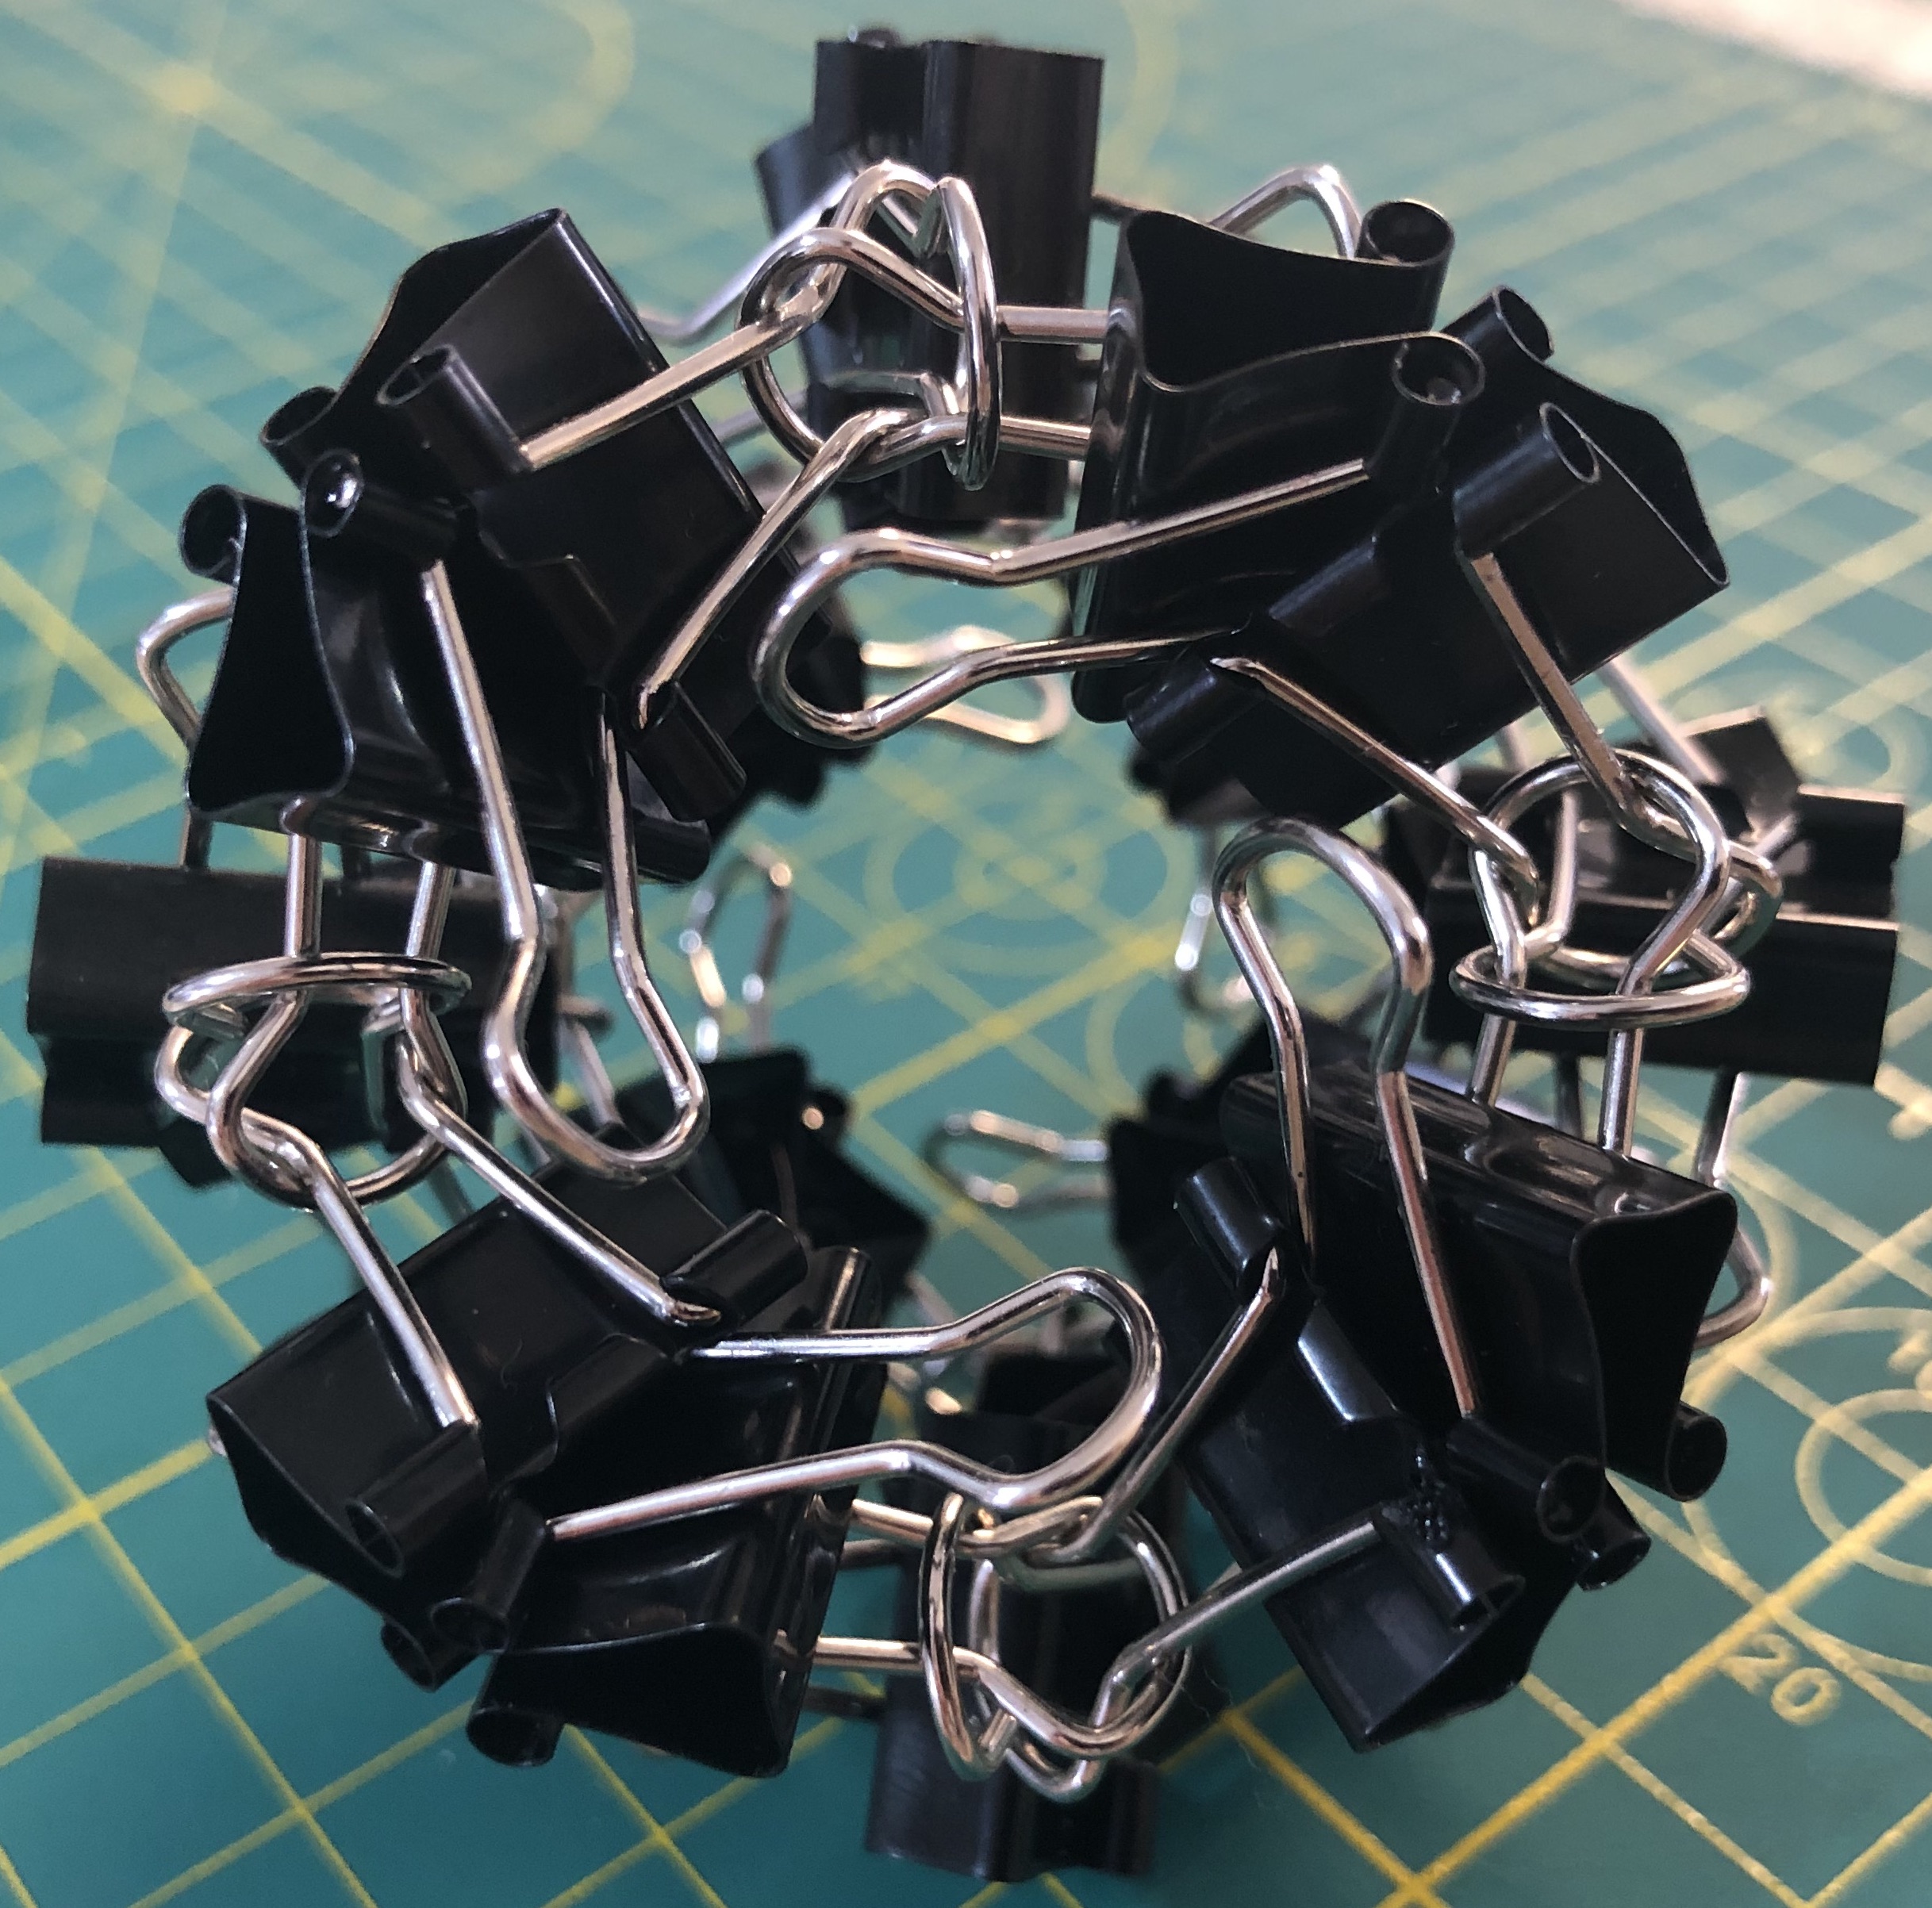 24 clips forming 6 Ψ-vertices forming octahedron